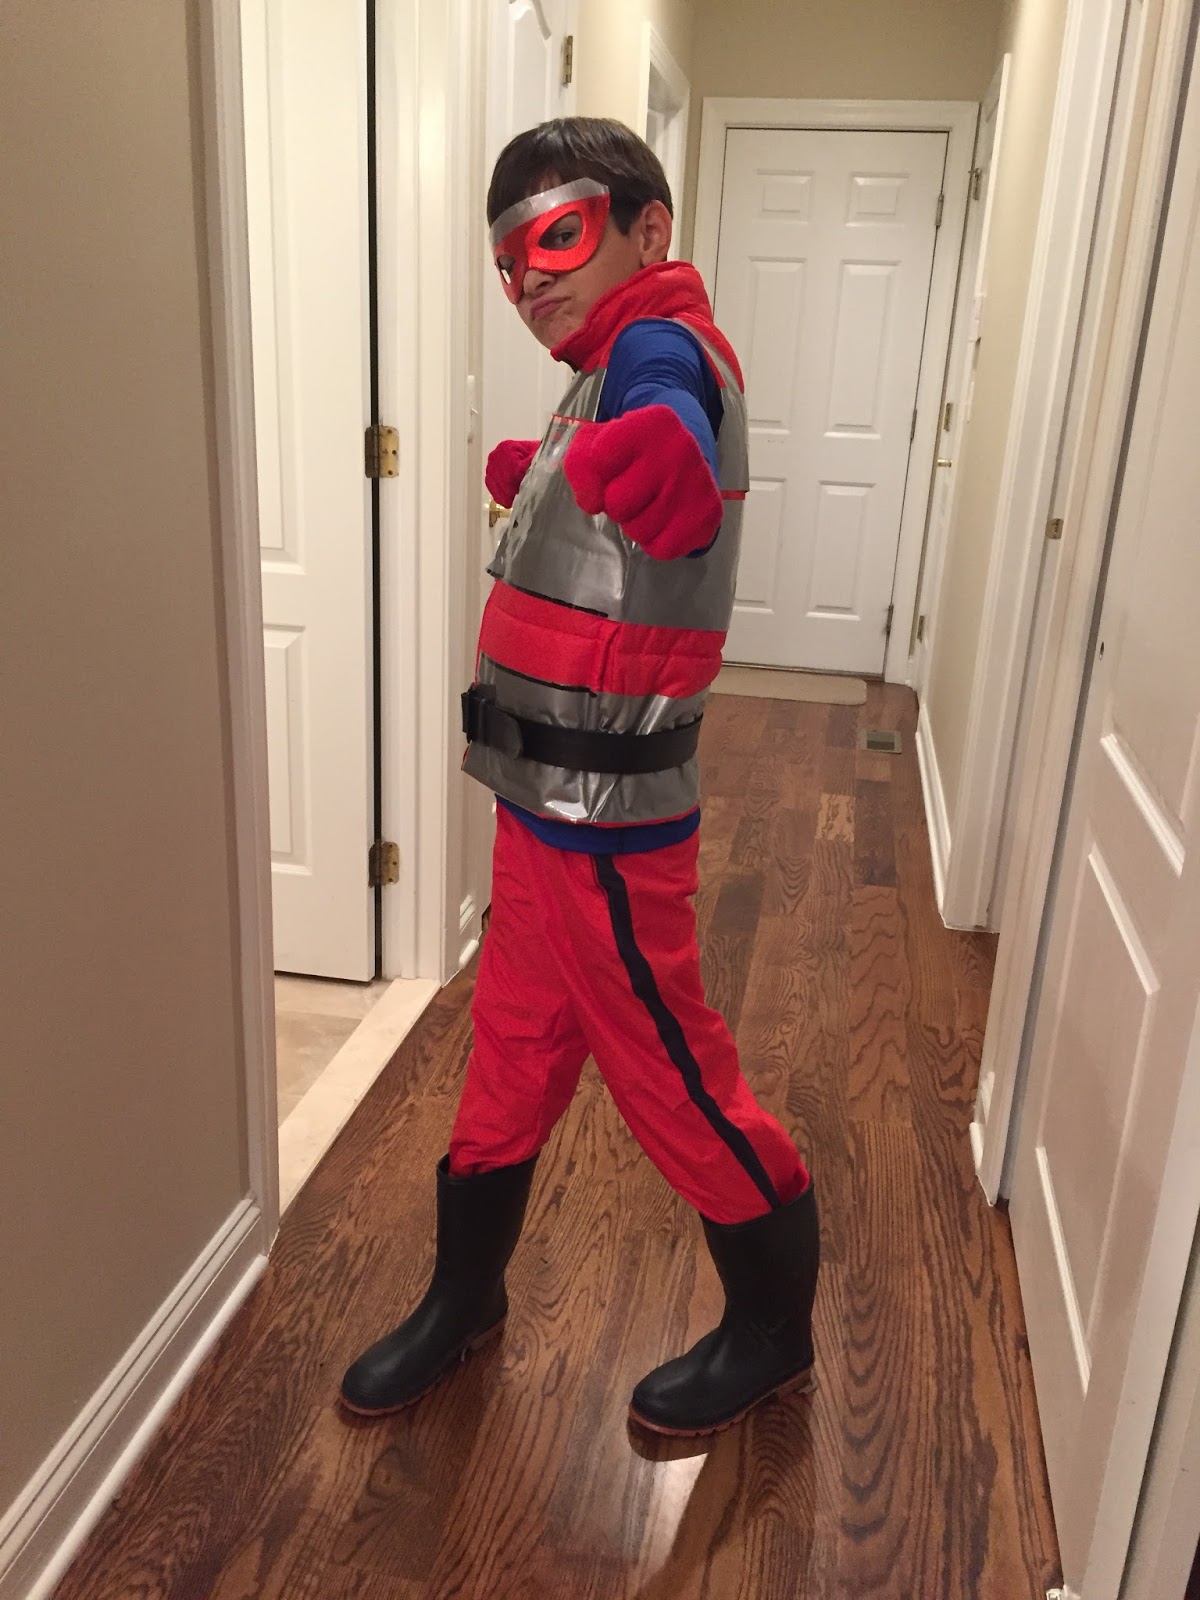 DIY Henry Danger Halloween Costume - Easy instructions to make your own!